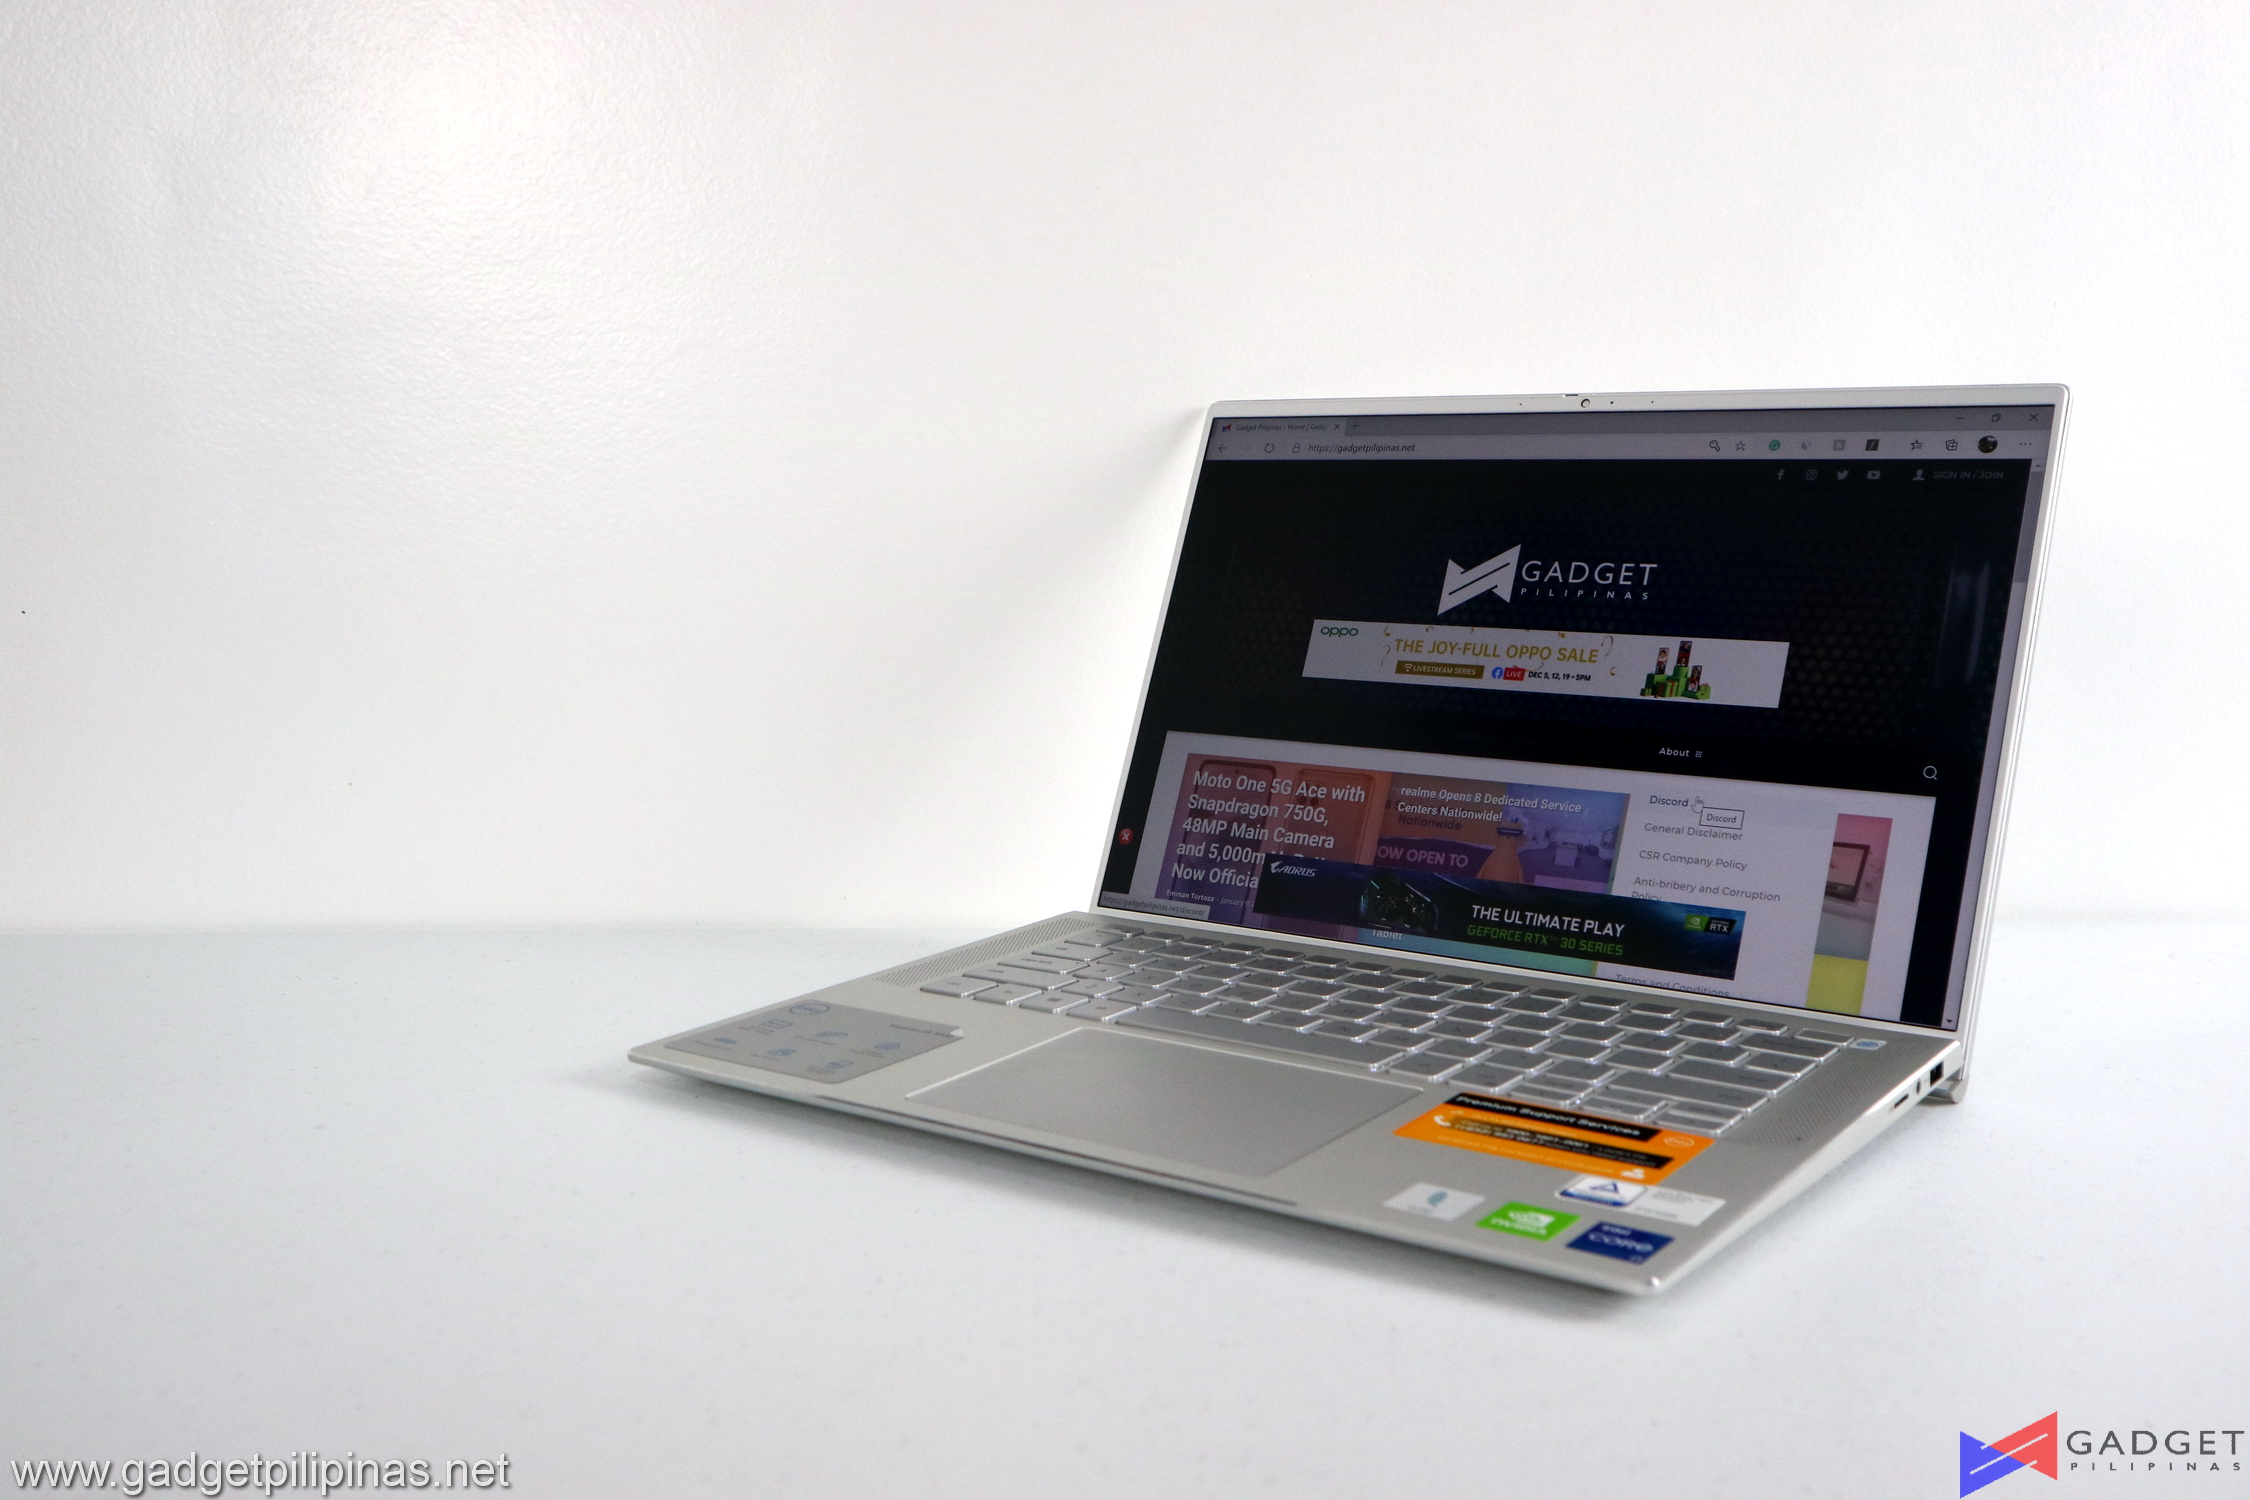 Dell Inspiron 14 7400 Review – An All-Rounder With A Stunning Display